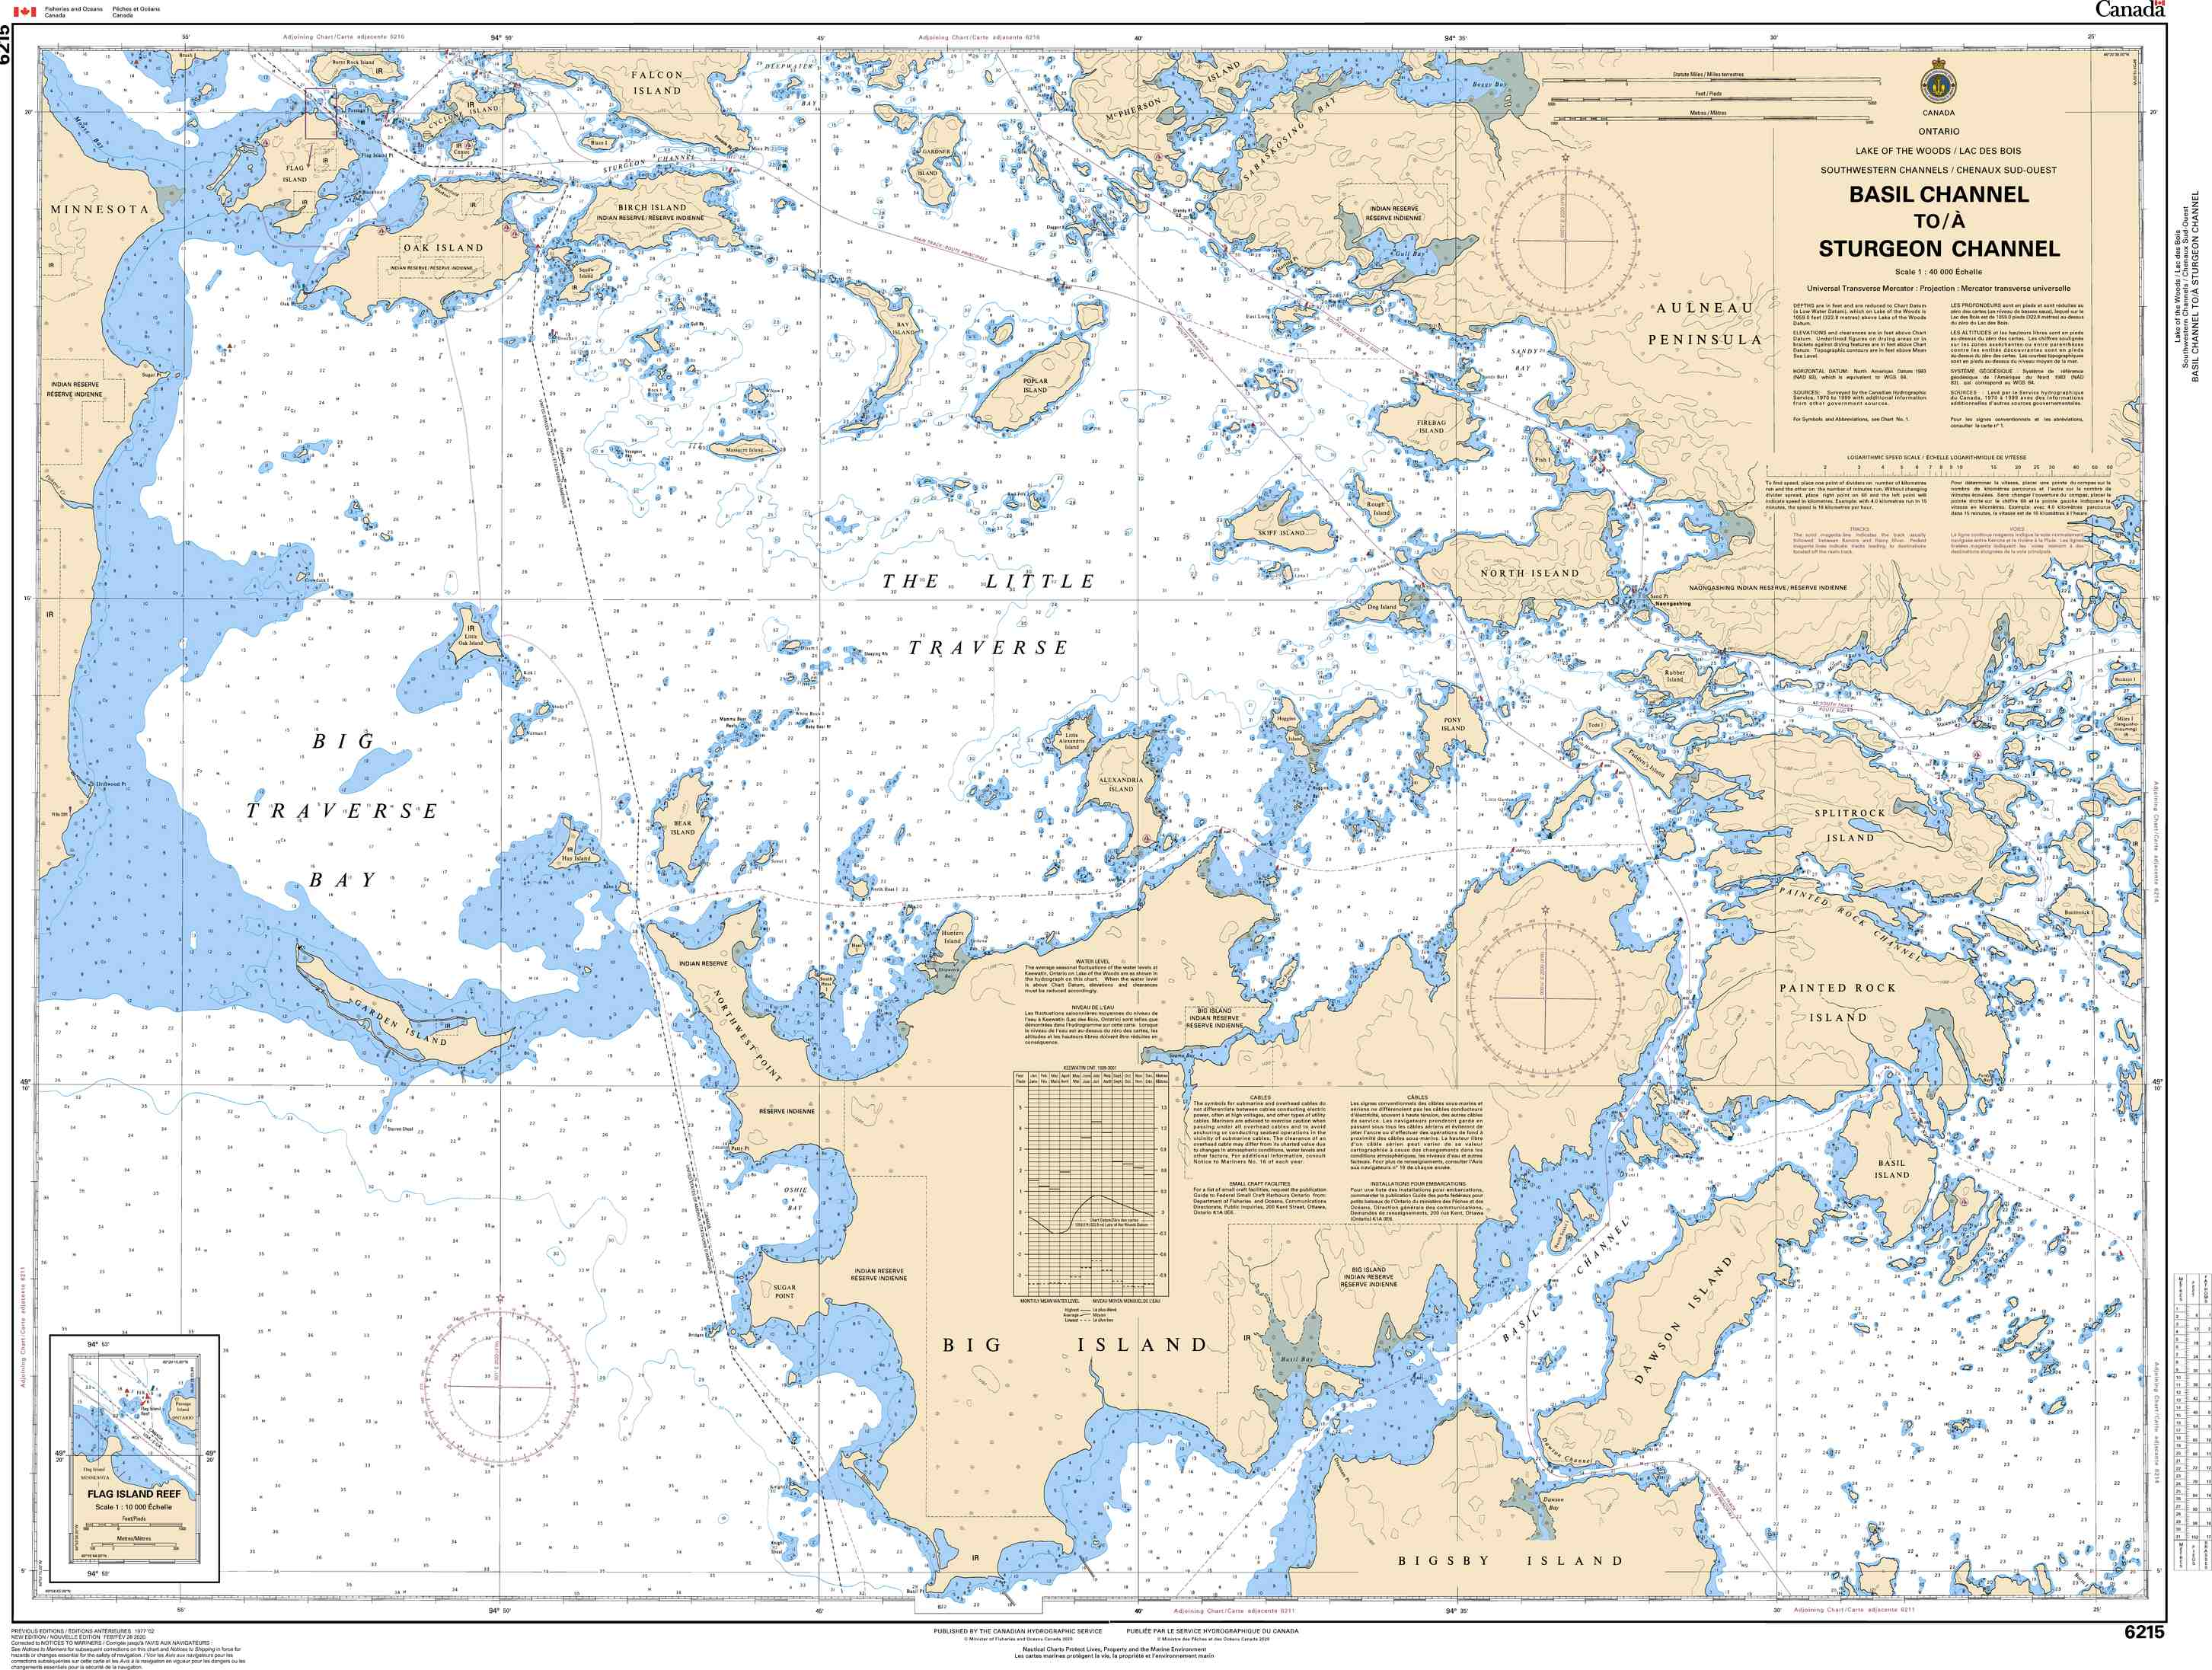 Canadian Hydrographic Service Nautical Chart CHS6215: Basil Channel to/à Sturgeon Channel